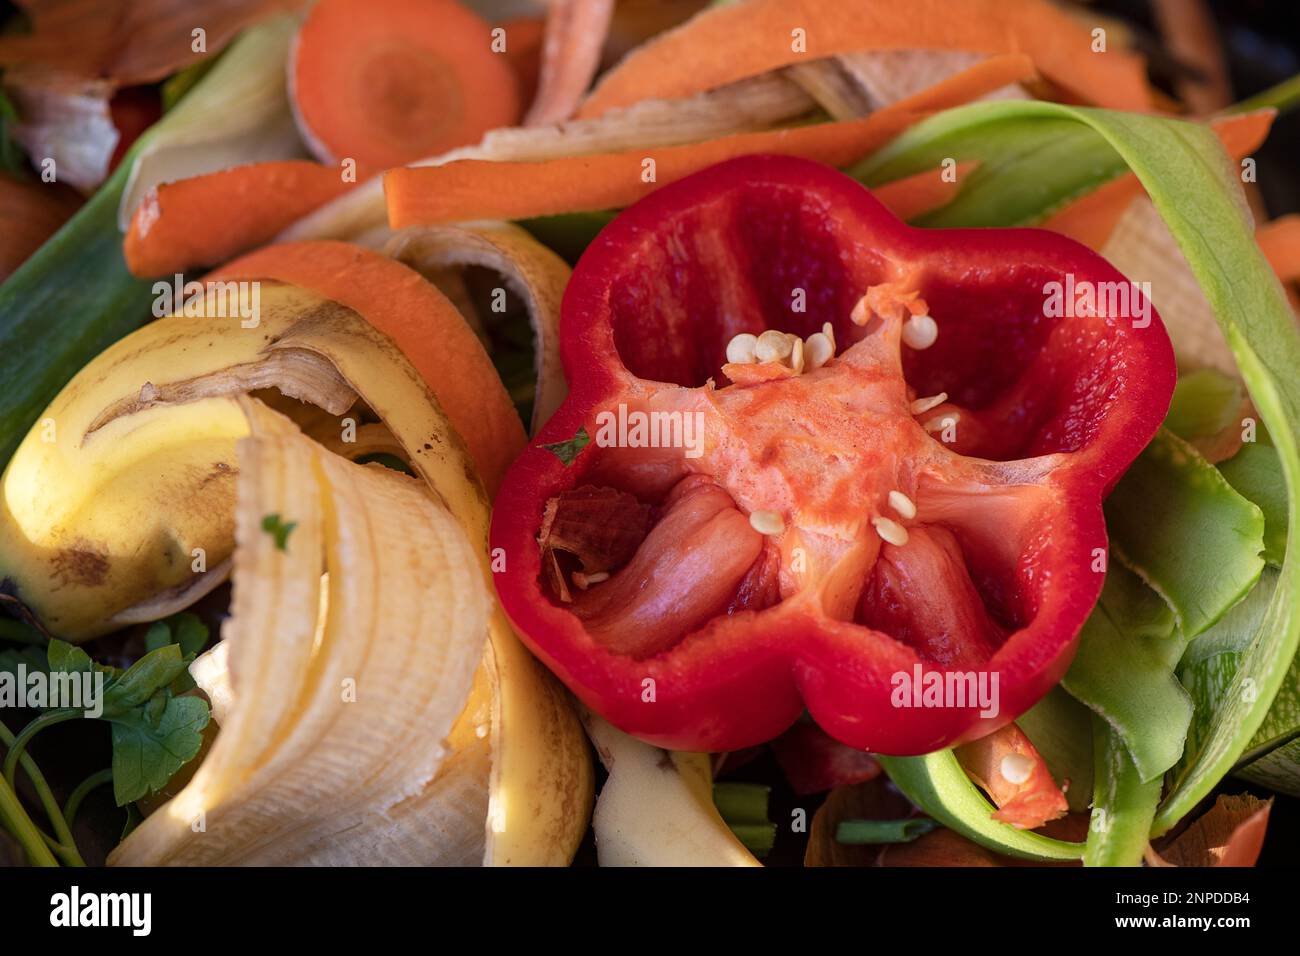 Vegetable scraps, peels and skins with focus on a red pepper with visible seeds, food used for biodegradable compost or added to plant soil Stock Photo